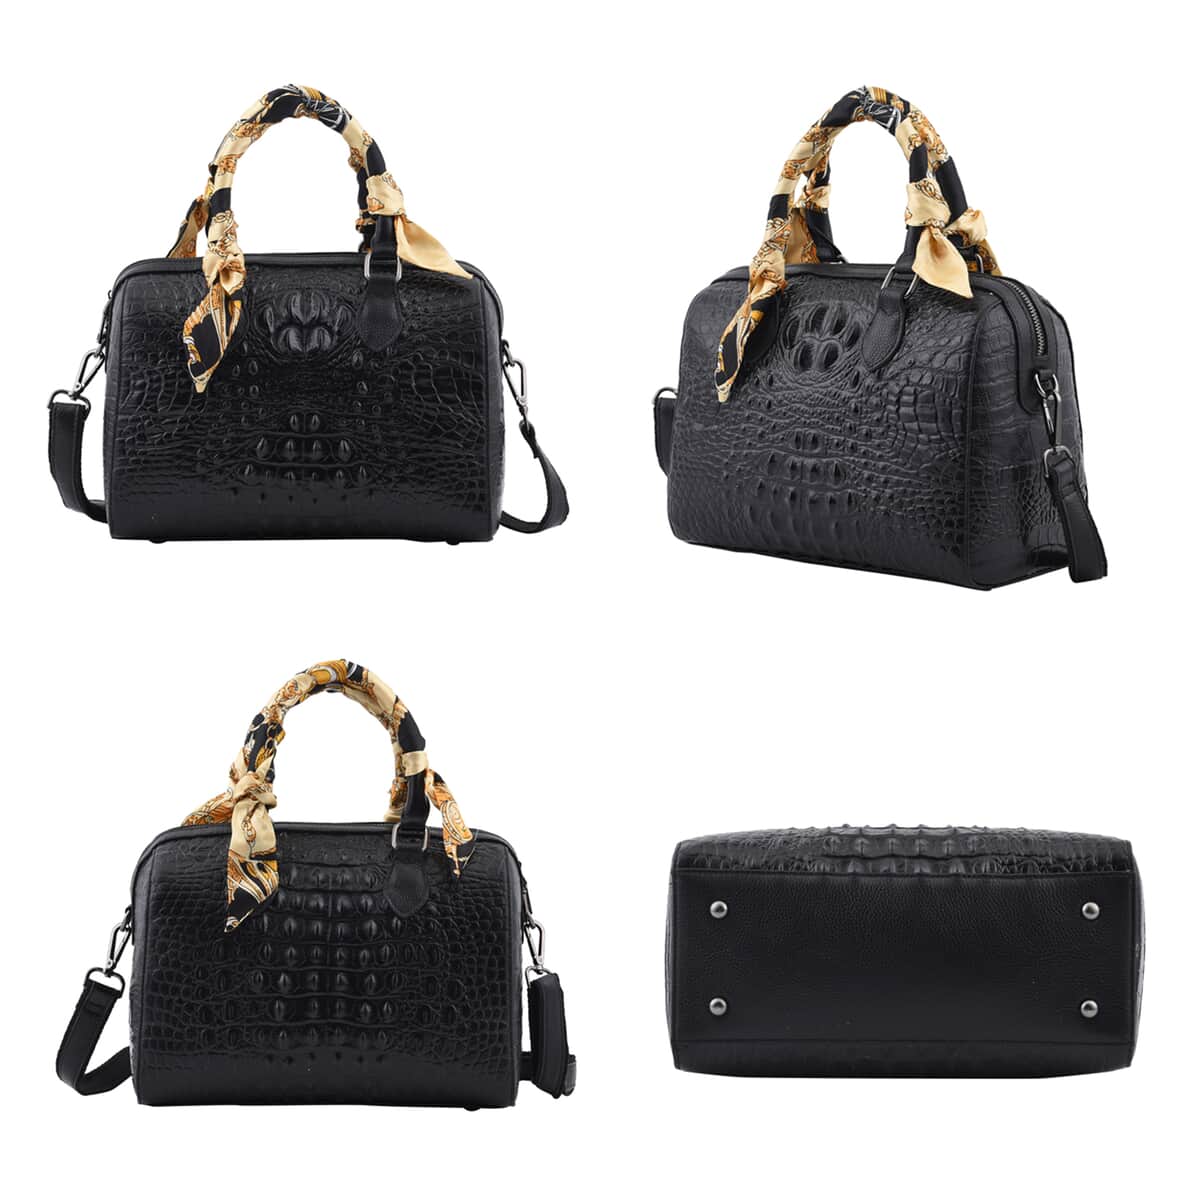 Black Crocodile Embossed Pattern Genuine Leather Crossbody Bag (11"x5"x9") with Hand Scarf Strap and Shoulder Strap image number 1